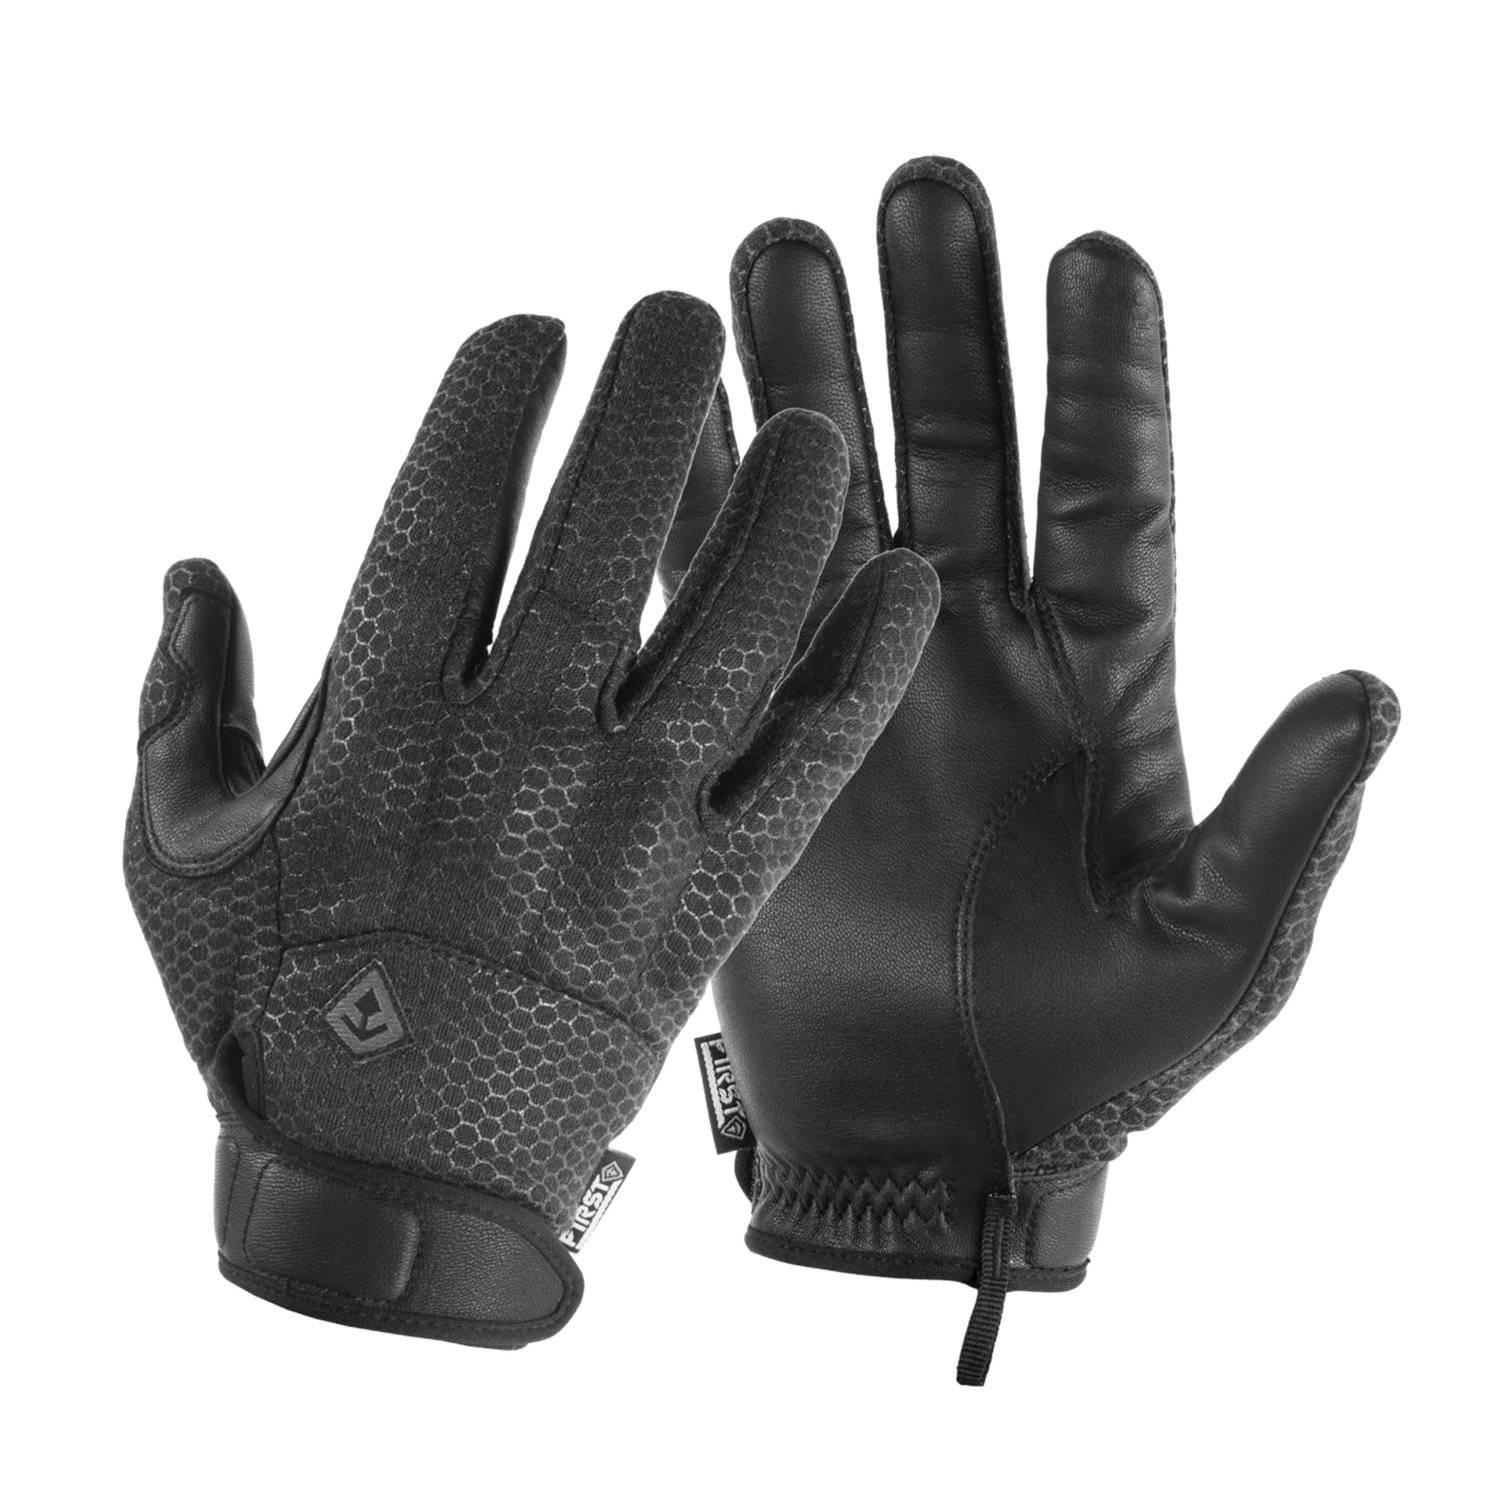 Protec Safe Search slash and needle resistant leather and kevlar search gloves